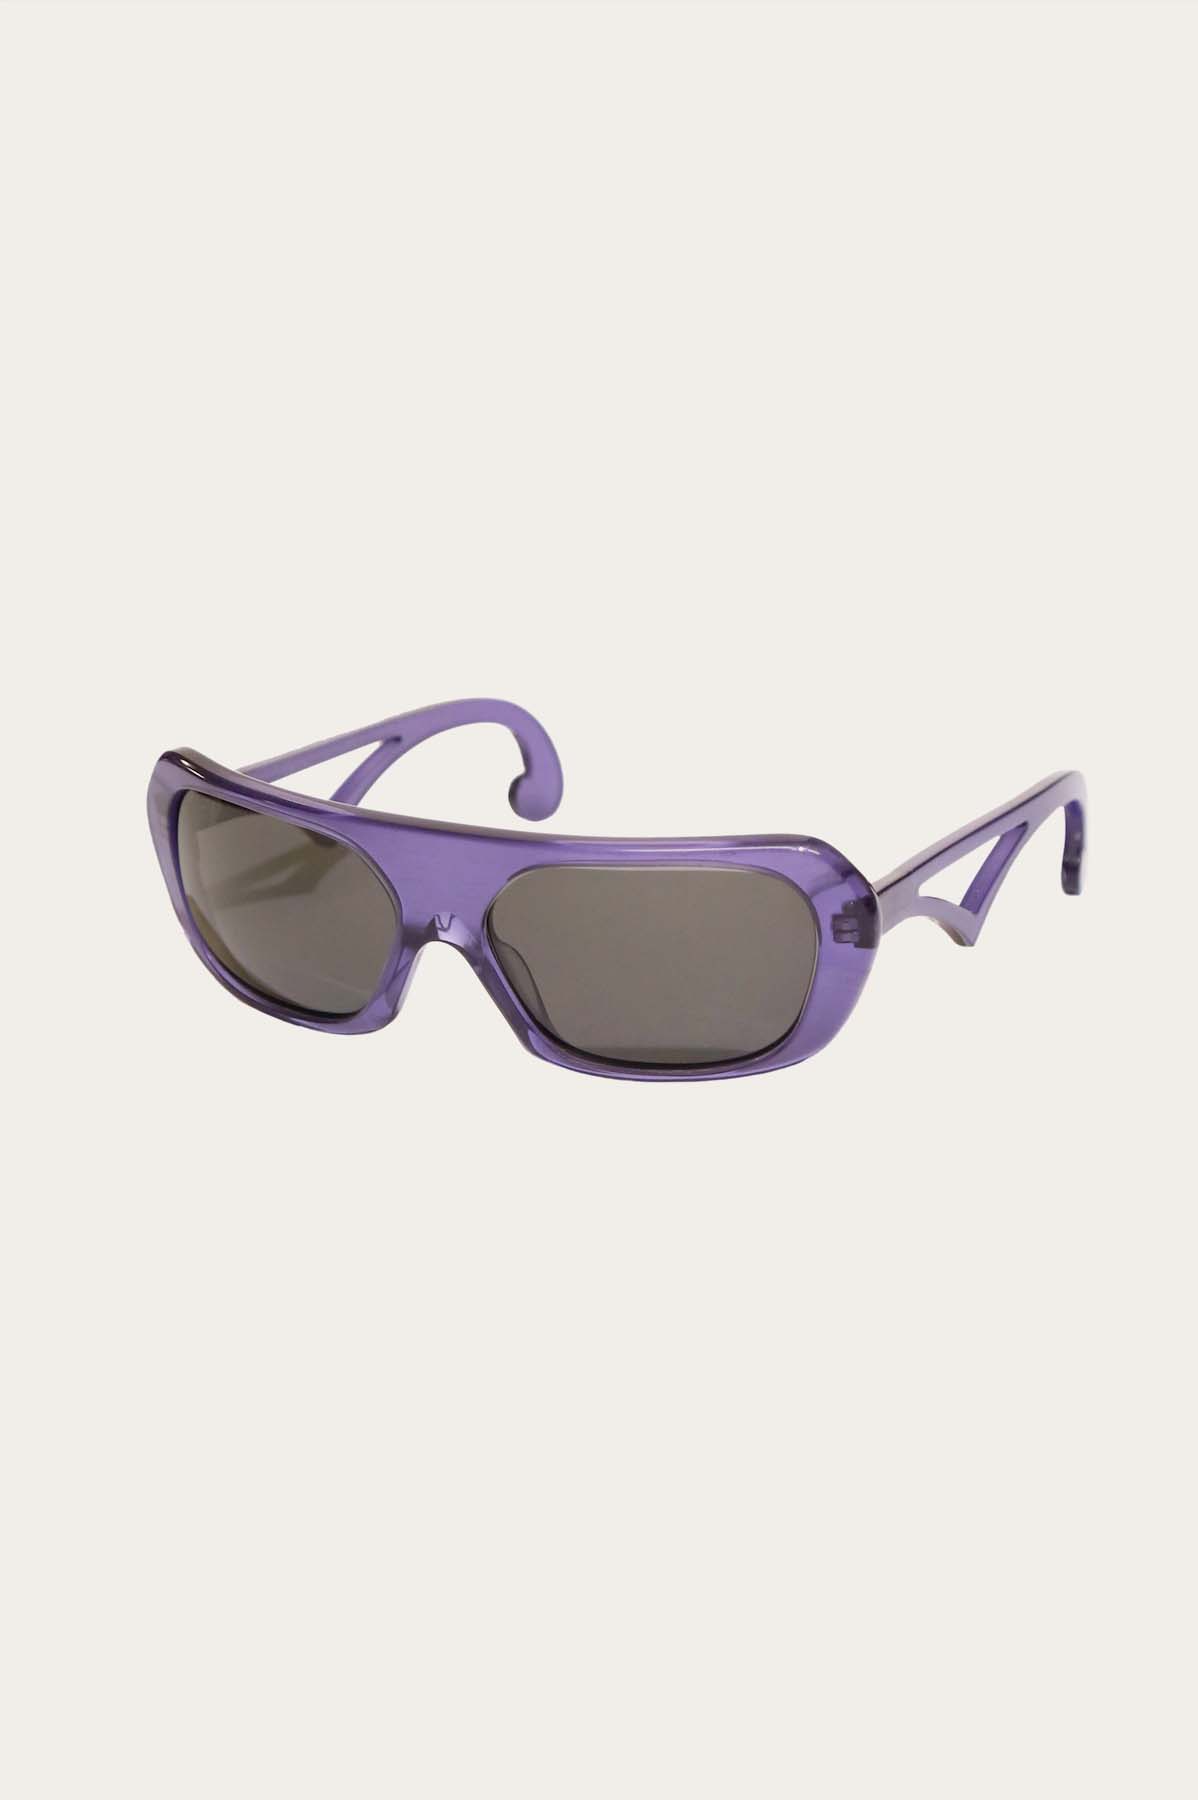 THE ANNA – Purple, large purple eyeglass frame with tinted lenses, branch with a V-Shaped design